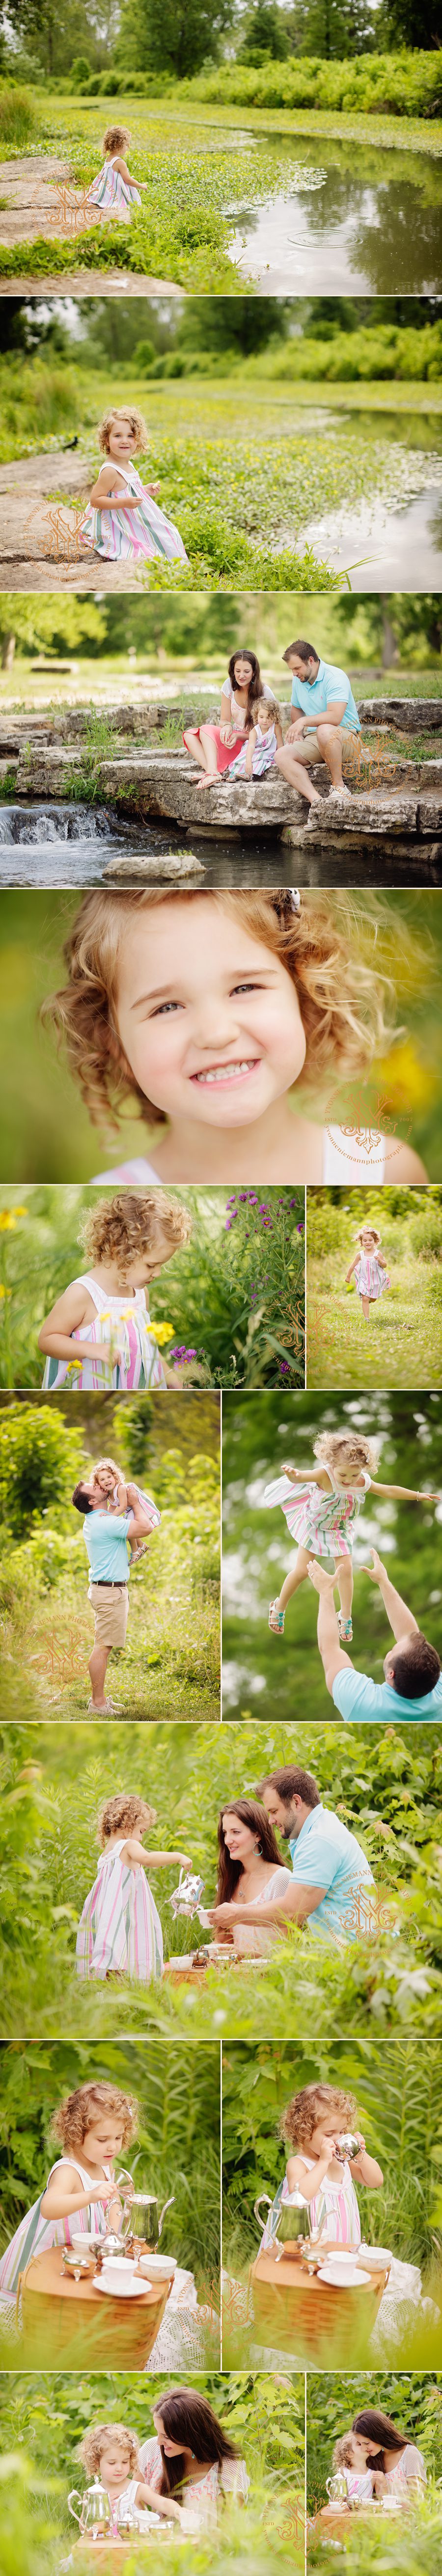 Pretty Family Portraits in St. Louis surrounded by pretty greenery and water taken by Yvonne Niemann Photography.